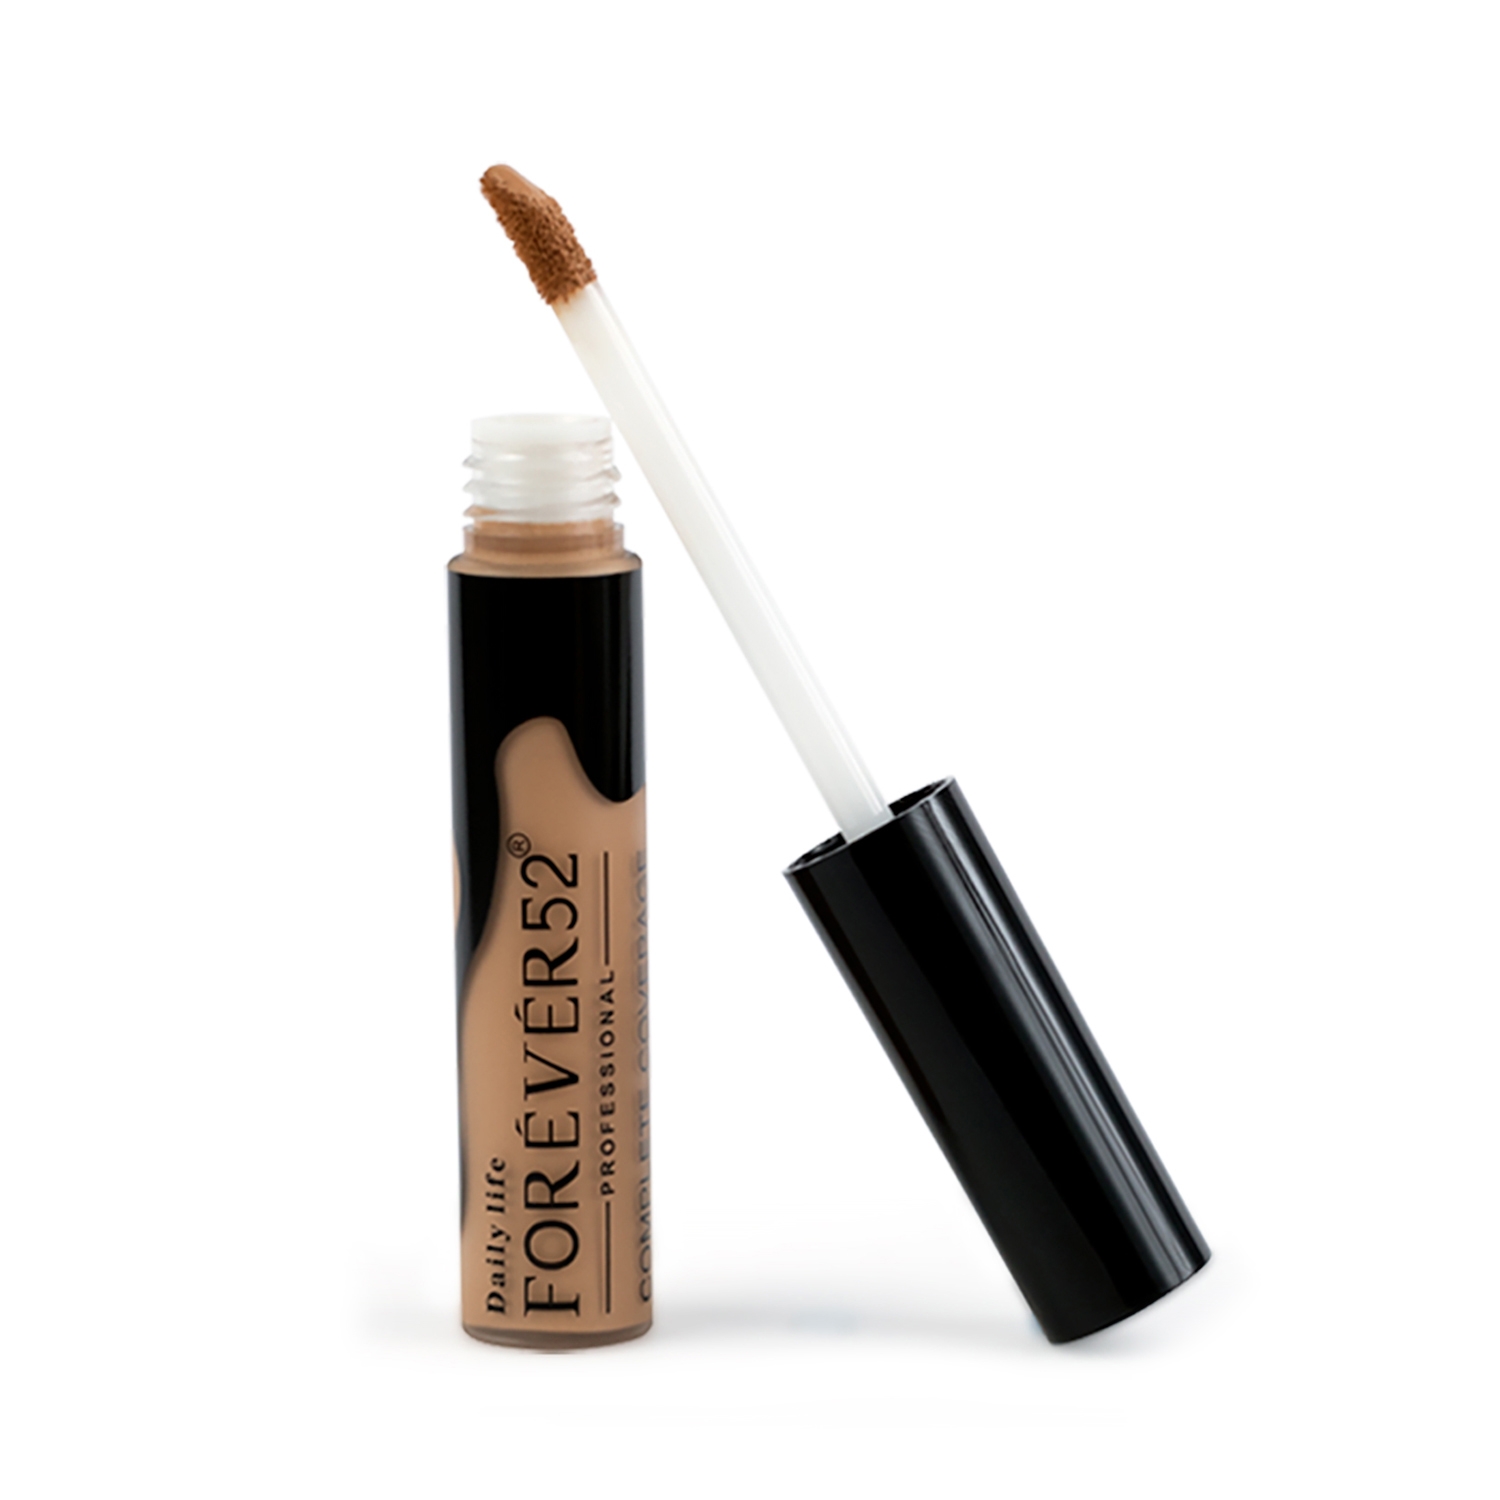 Daily Life Forever52 | Daily Life Forever52 Complete Coverage Concealer COV006 - Mocha (10g)